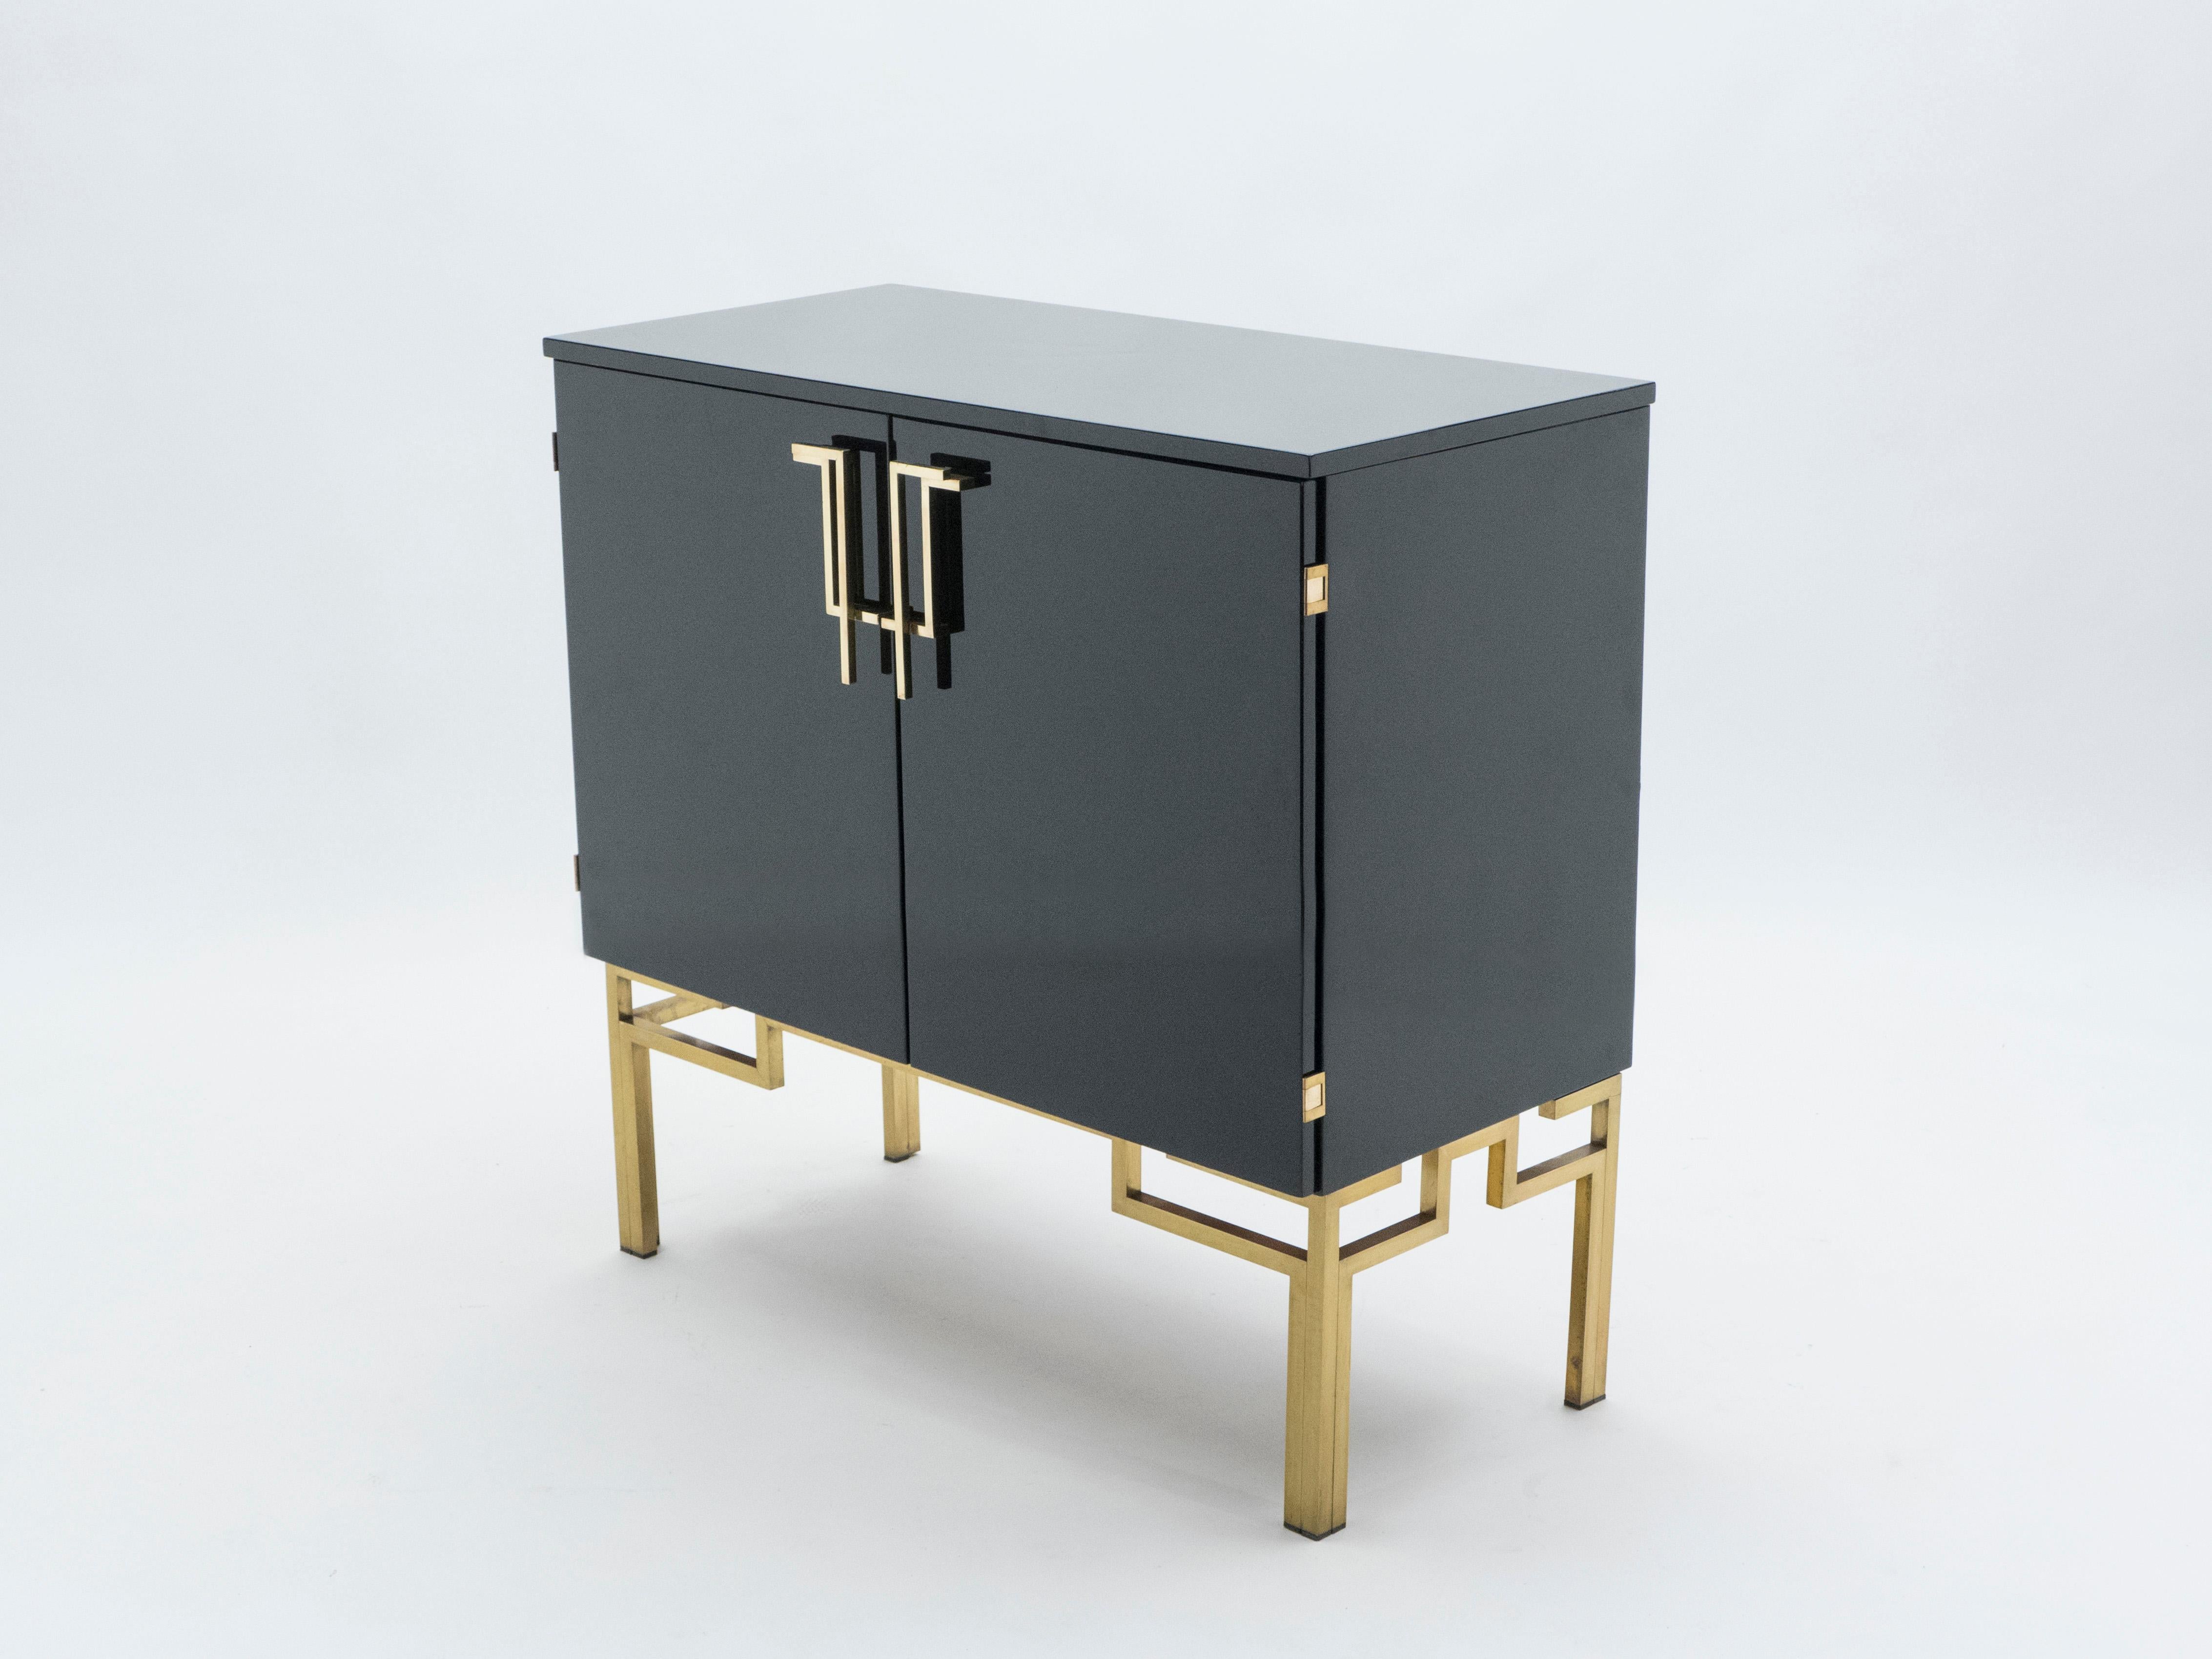 A very rare vintage Guy Lefevre for Maison Jansen cabinet bar made in the 1970s. Glossy black lacquer, paired with bright brass Asian inspired handles end feet, feels crisp and luxe. Featuring 2 doors and an opening top, it used to be high-end Hifi